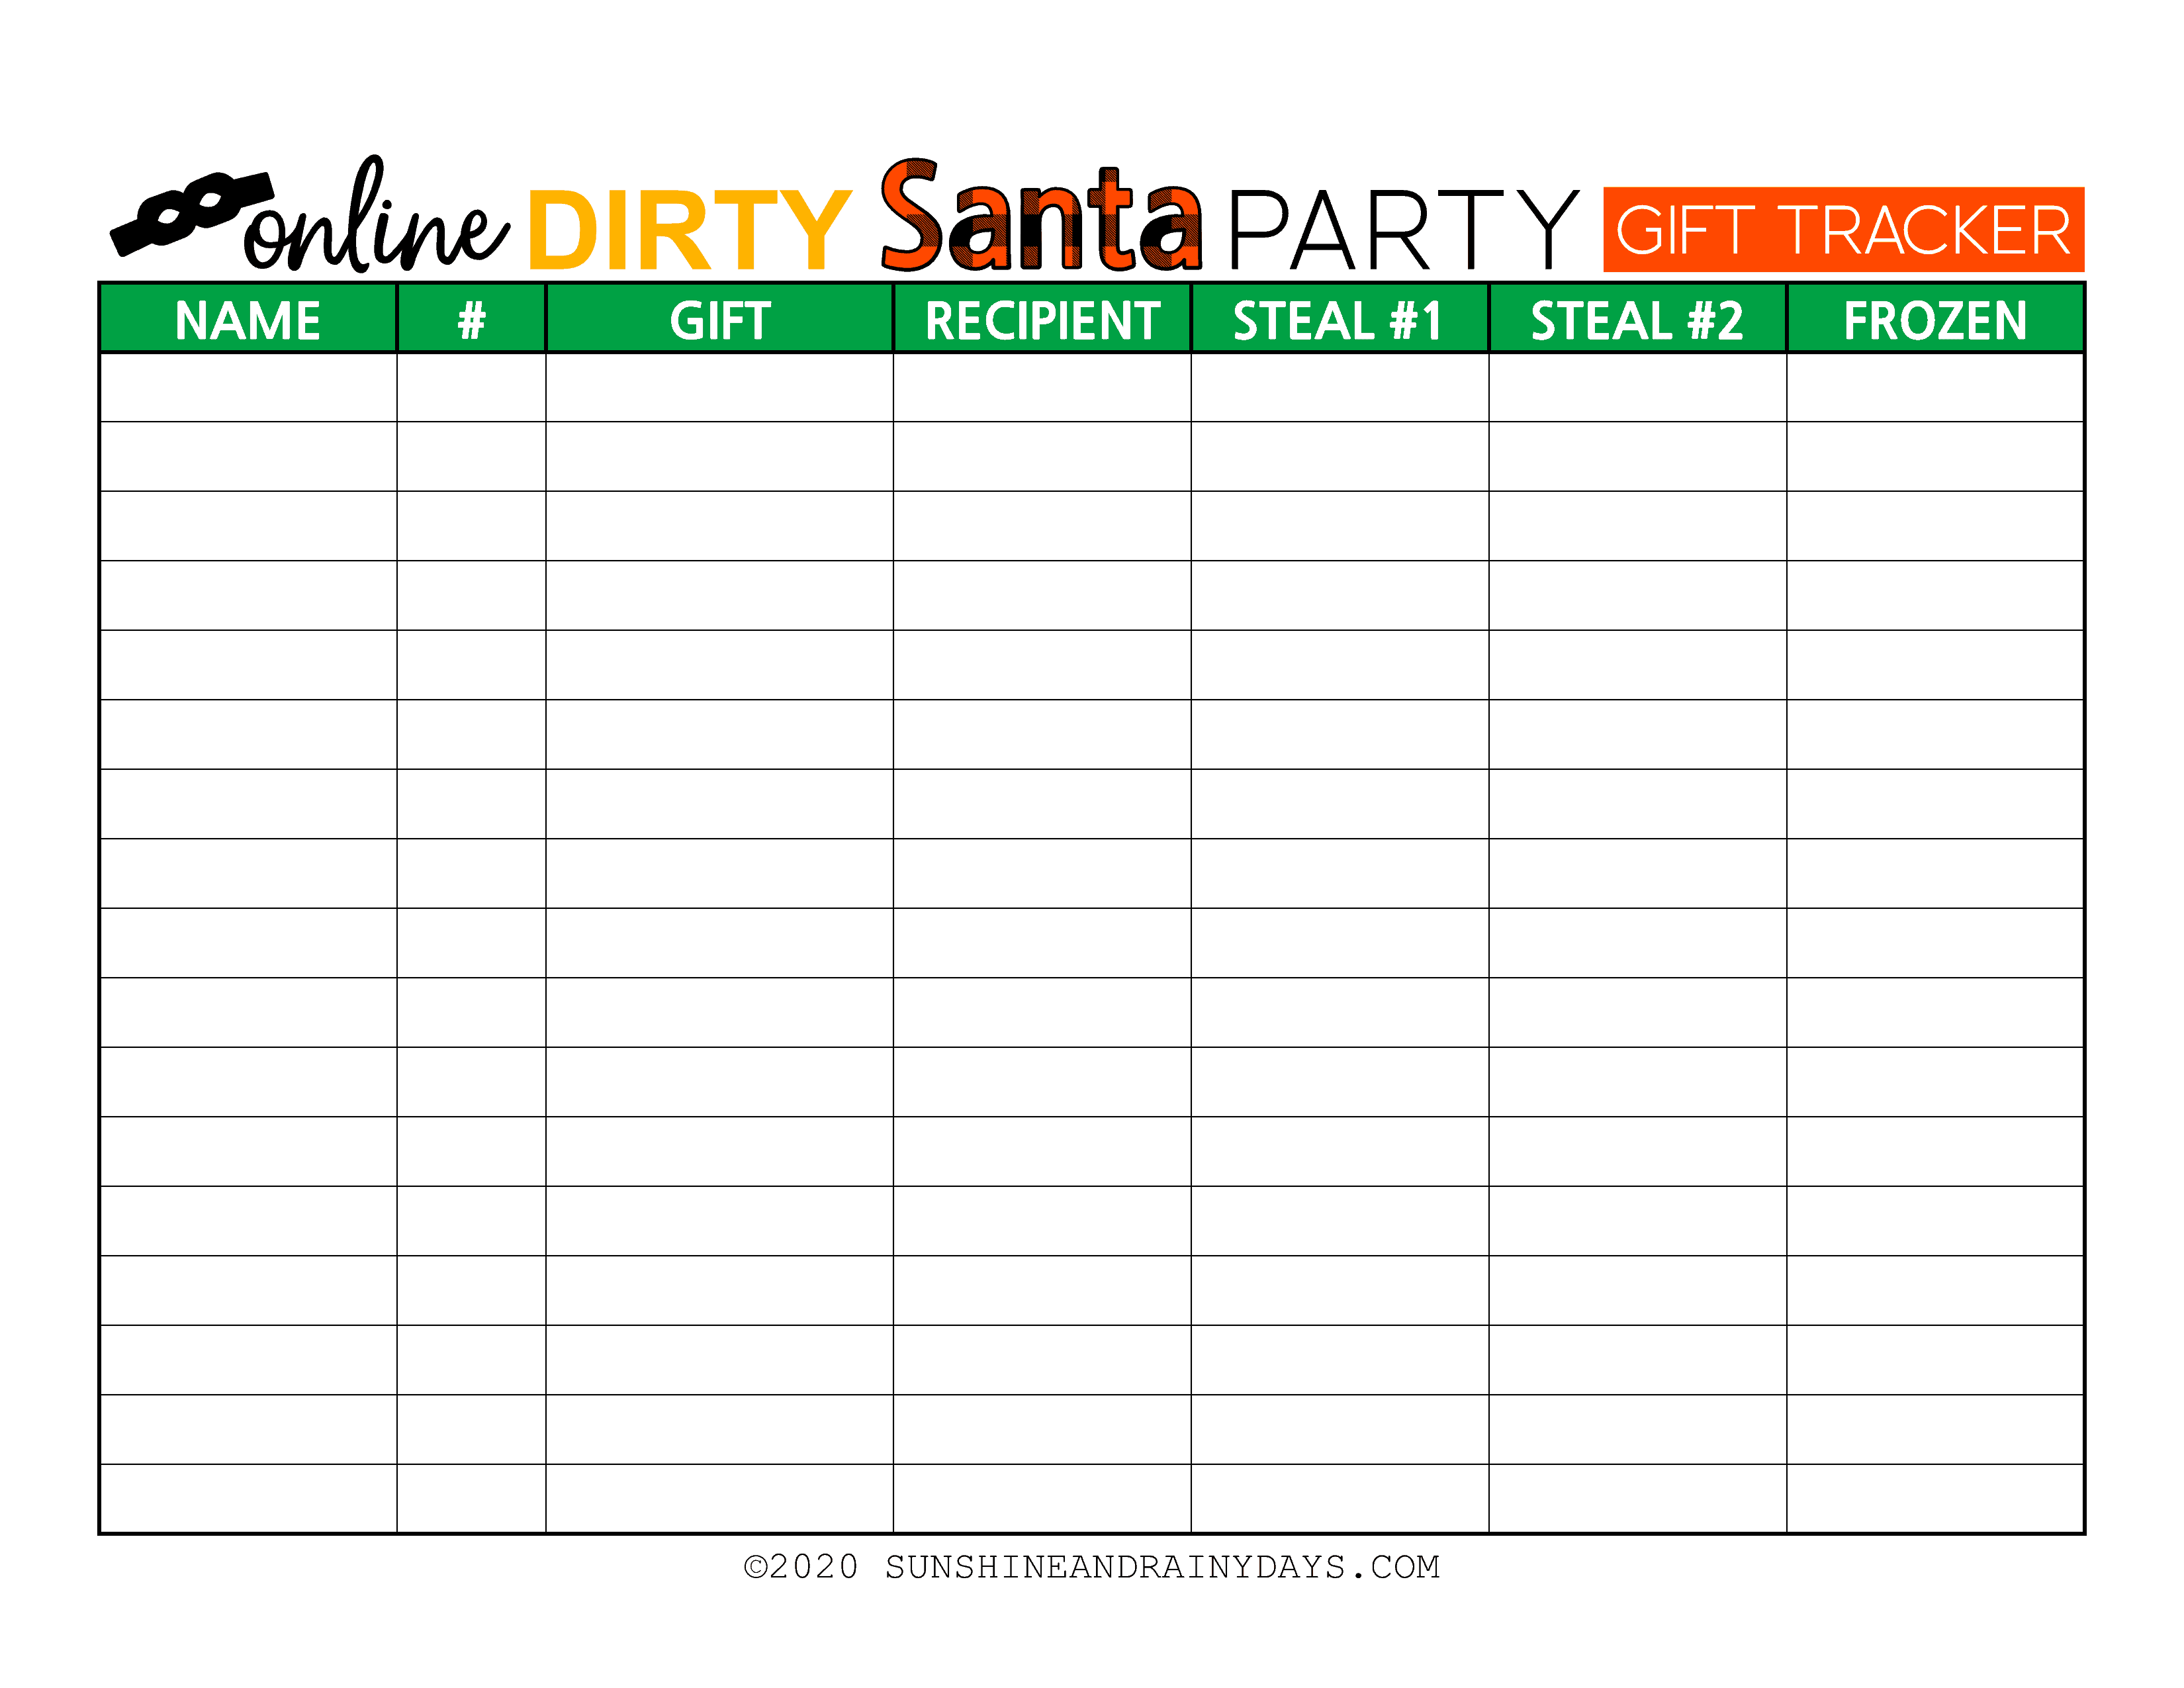 Online Dirty Santa Party Gift Tracker